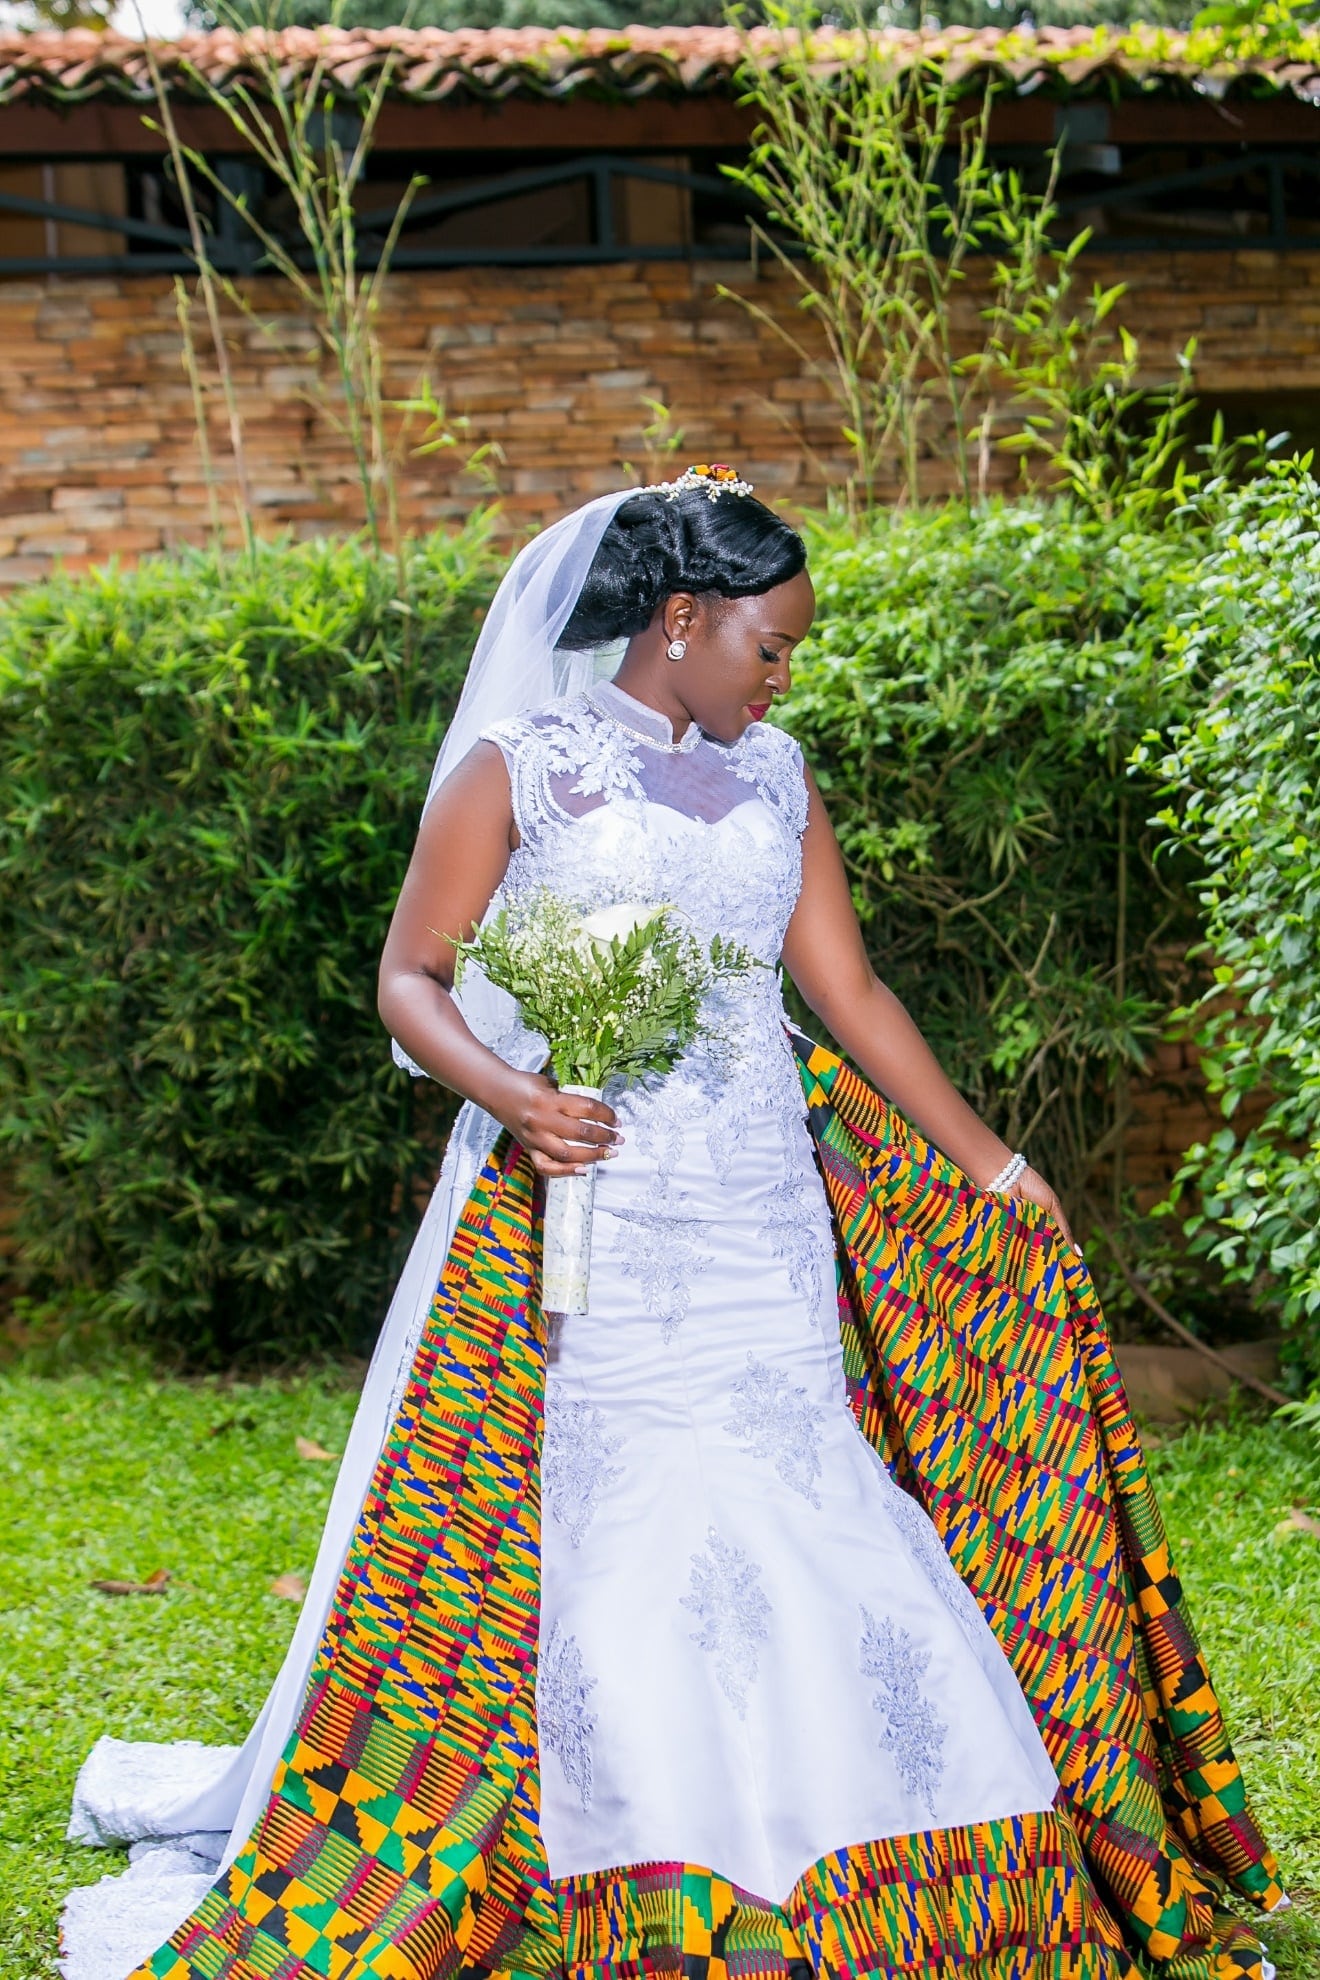 African themed wedding dress: Crystal shares her story